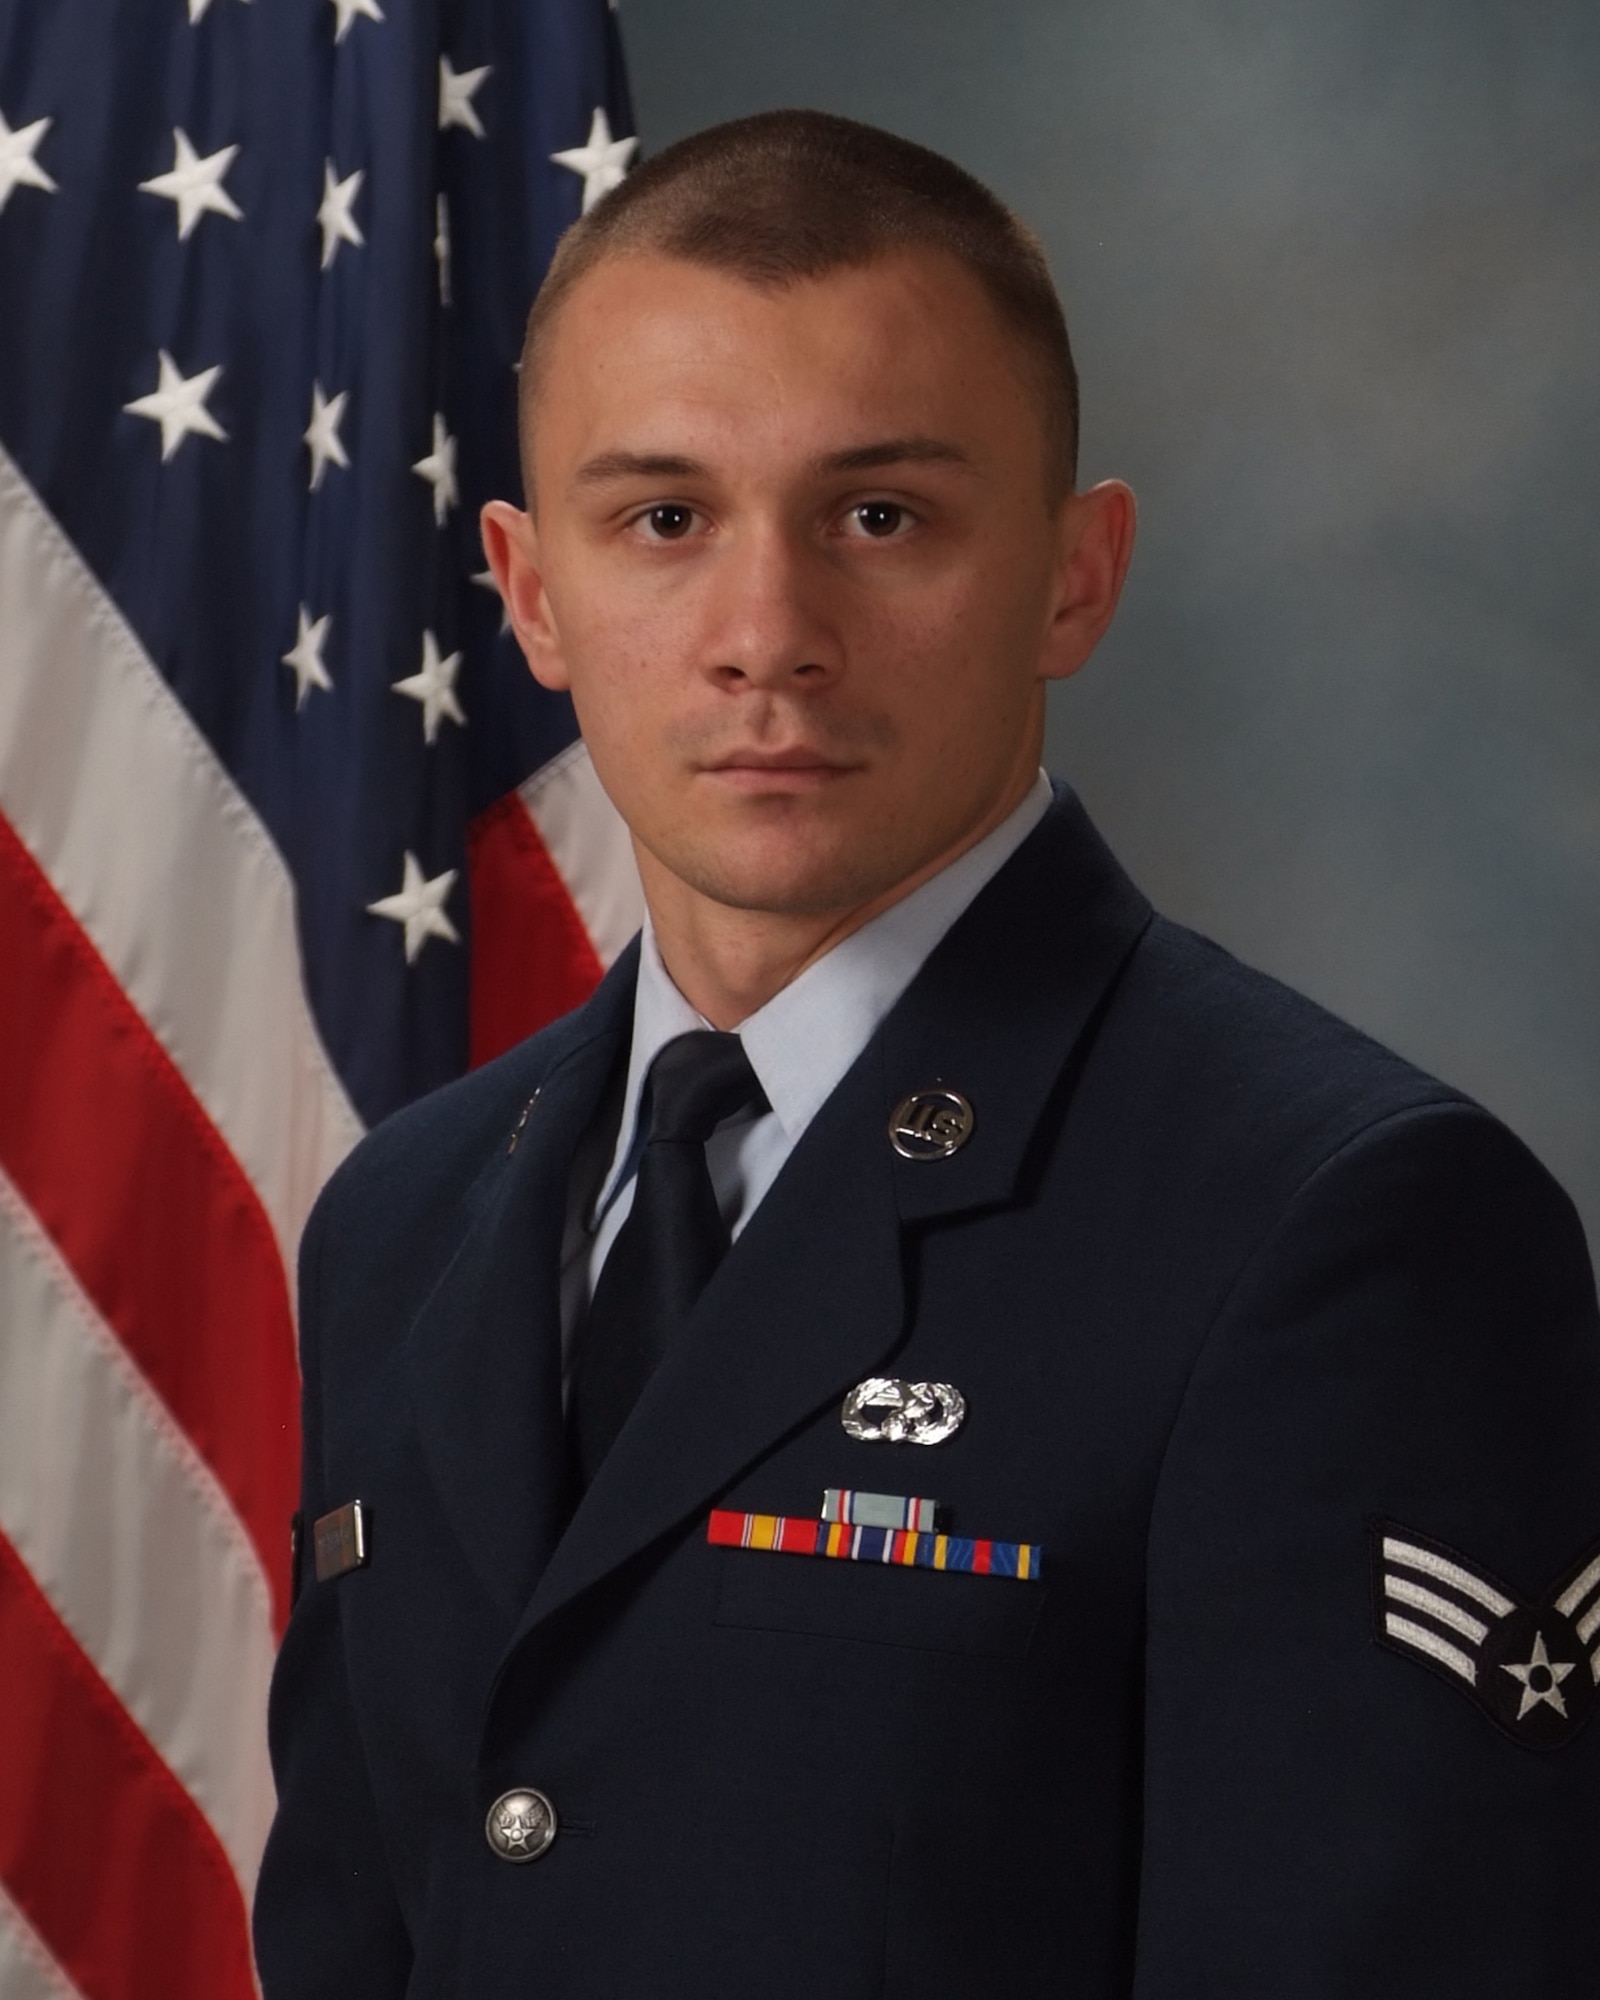 Senior Airman Muhamed Mehmedovic was saved from starvation by the U.S. Air Force when they air dropped food from C-130 Hercules aircraft in Bosnia from 1992 to 1995. Mehmedovic, a 19th Logistic Readiness Squadron air transportation journeyman, now pays homage to the country he said saved his family's life. (Courtesy photo)